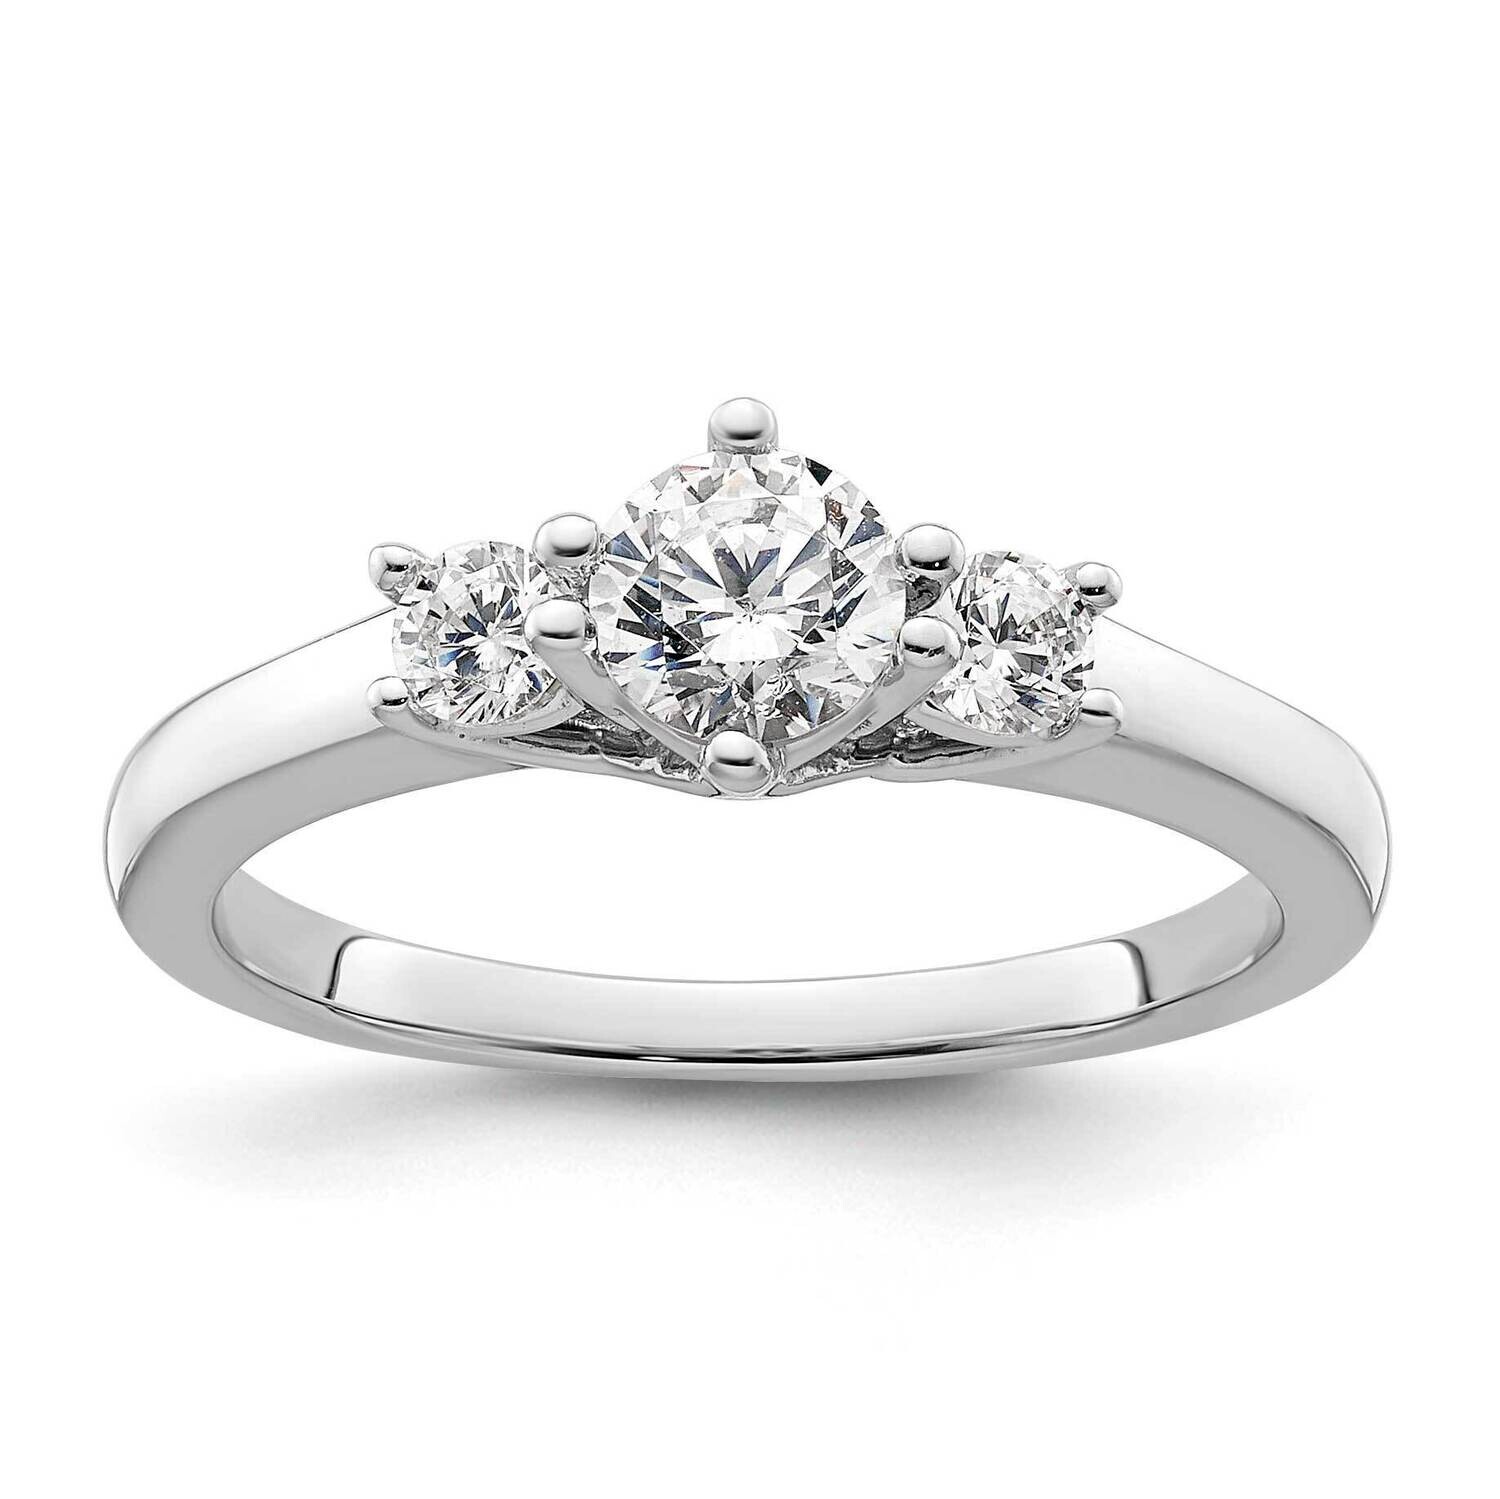 3-Stone Holds 1/2 Carat 5.2mm Round Center Includes 2-3.0mm Round Side Stones Semi-Mount Engagement Ring 14k White Gold RM2949E-050/020-WAA